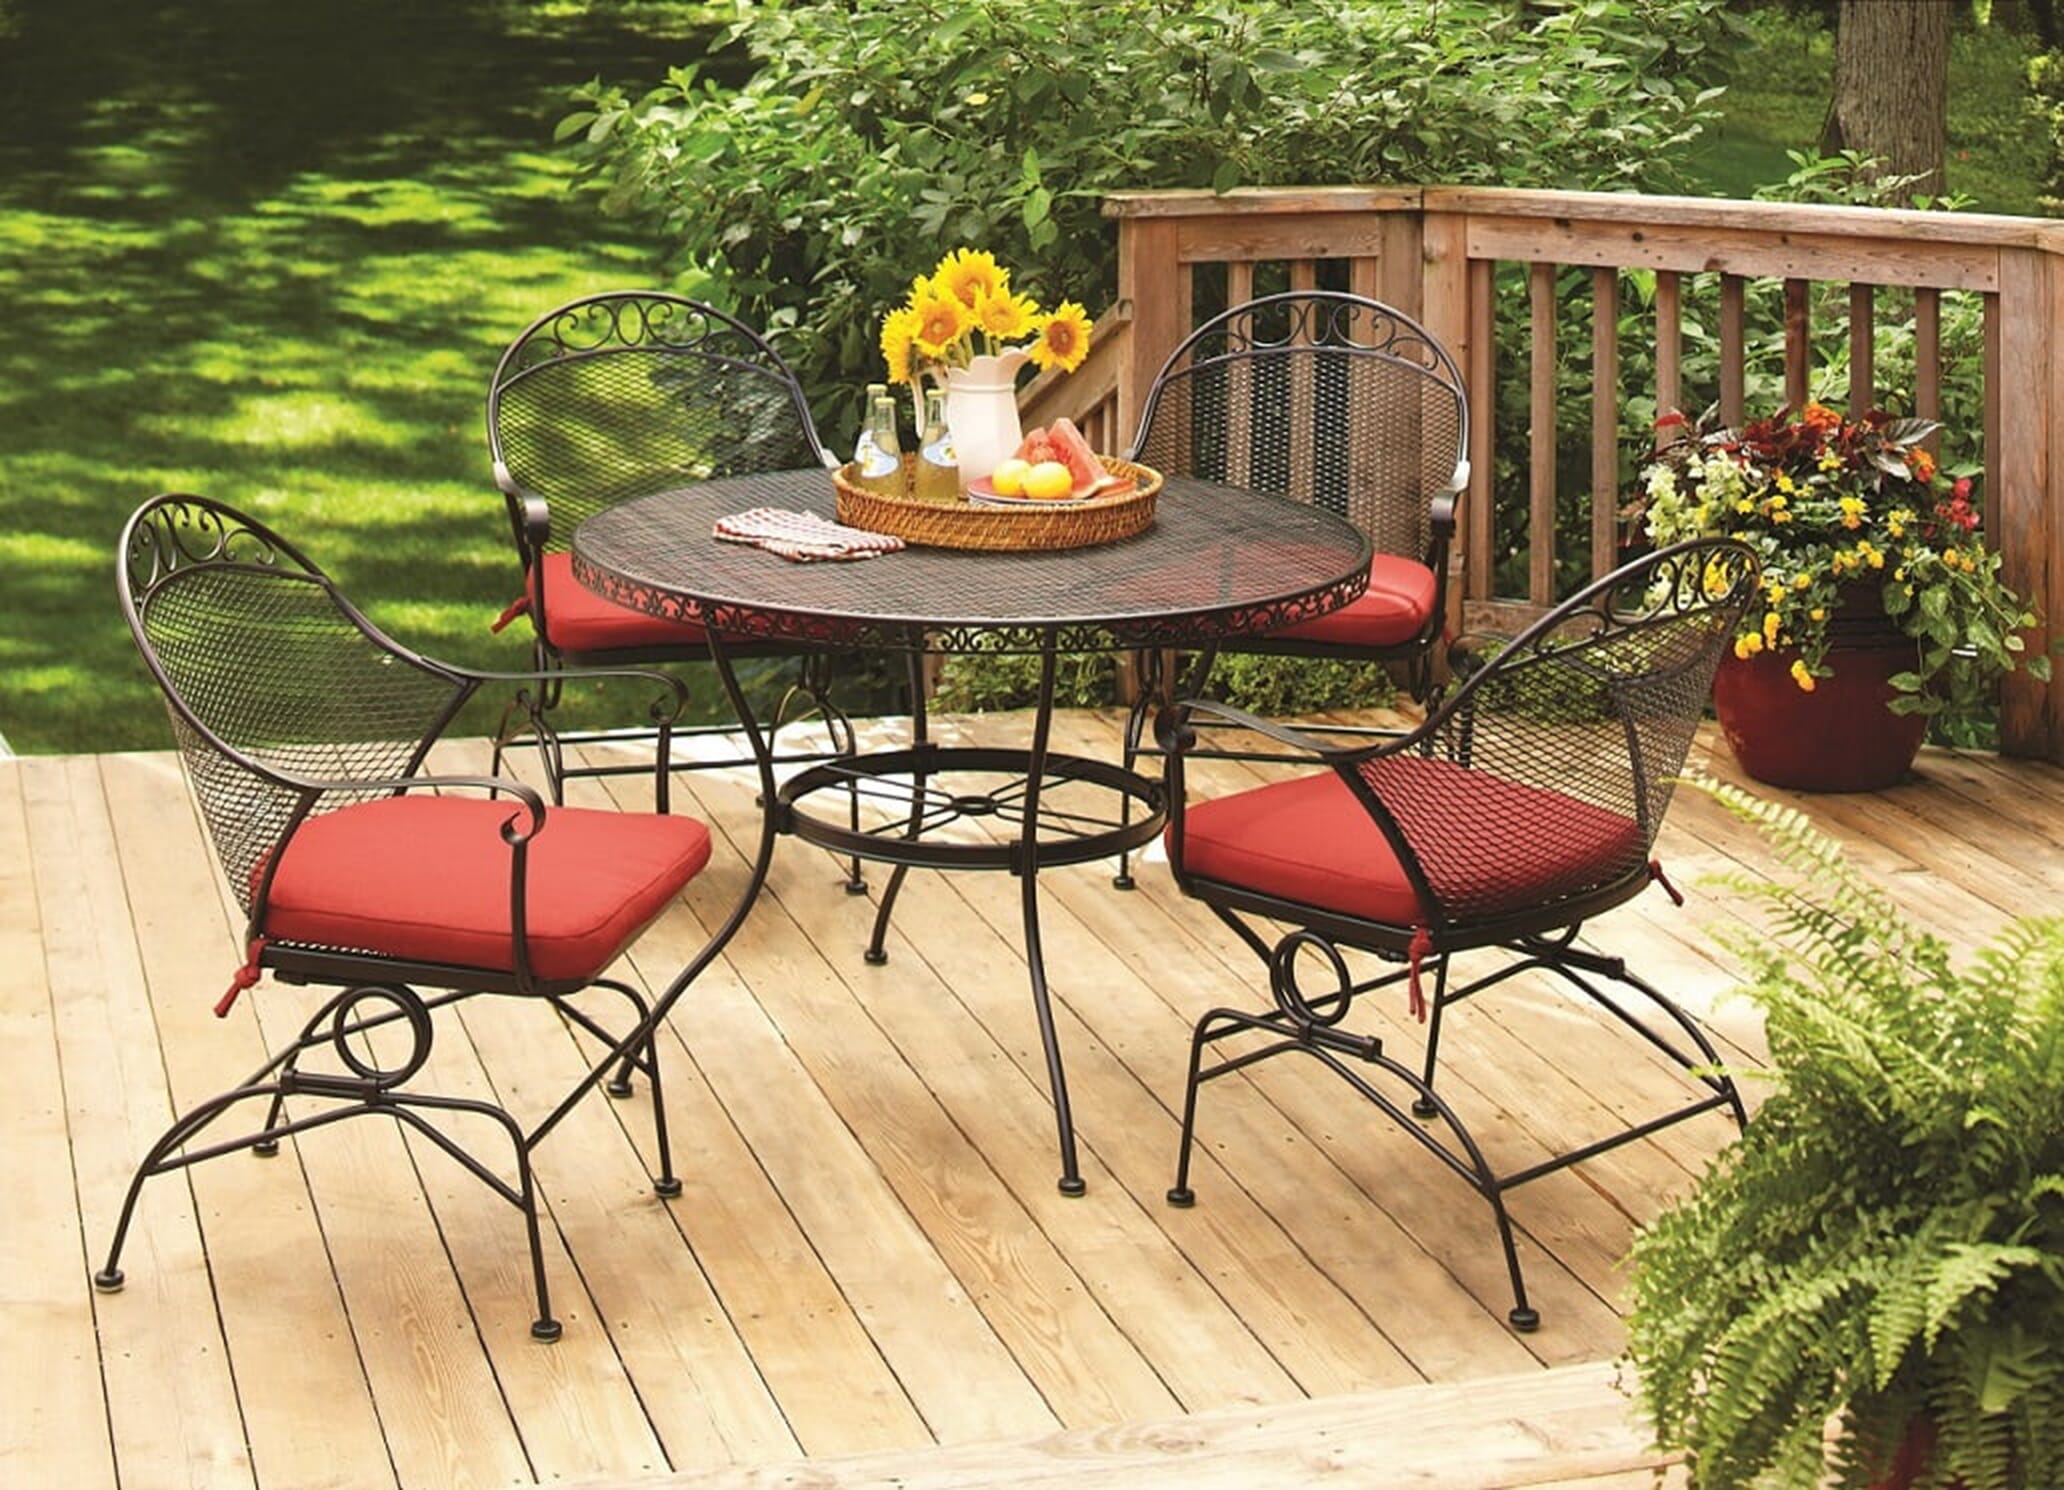 Better Homes and Gardens Wrought Iron Patio Dining Set, Clayton Court Cushioned 5 Piece, Red - image 1 of 1